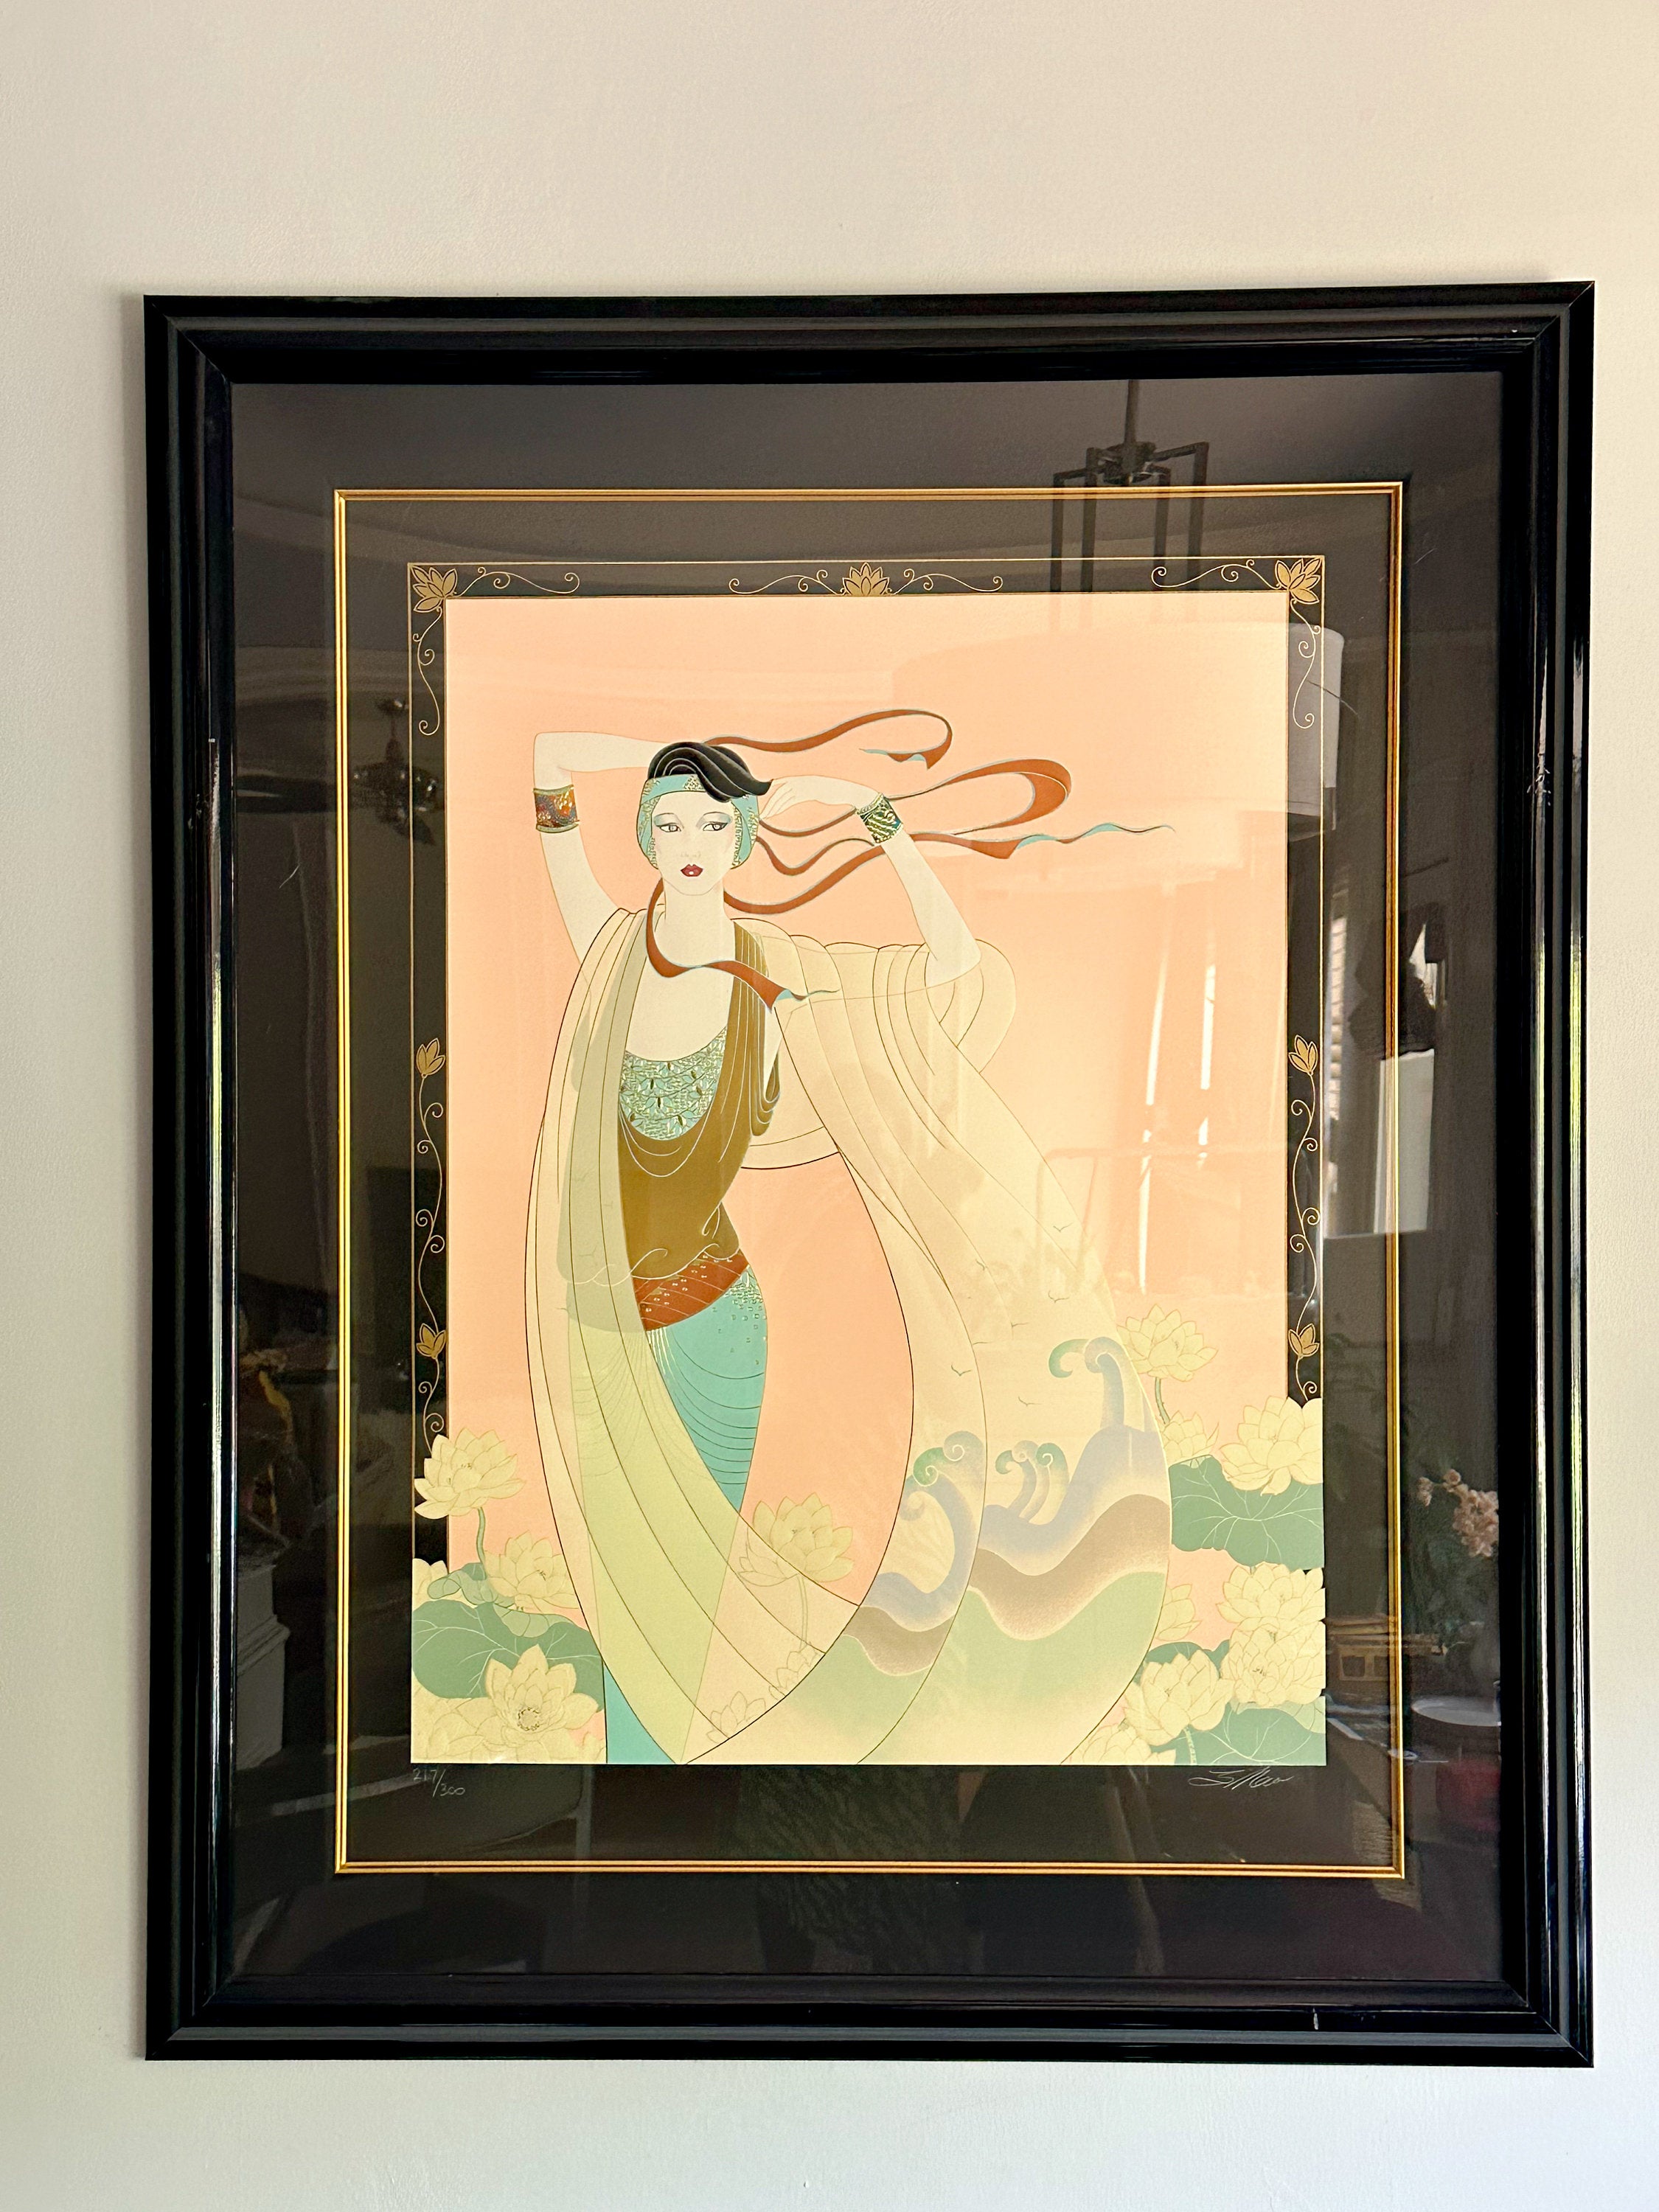 Vintage Lillian Shao Limited Edition Serigraph on Paper "Lotus" Framed Art Print Signed and Numbered | Art Deco Chinese Style Art Home Decor